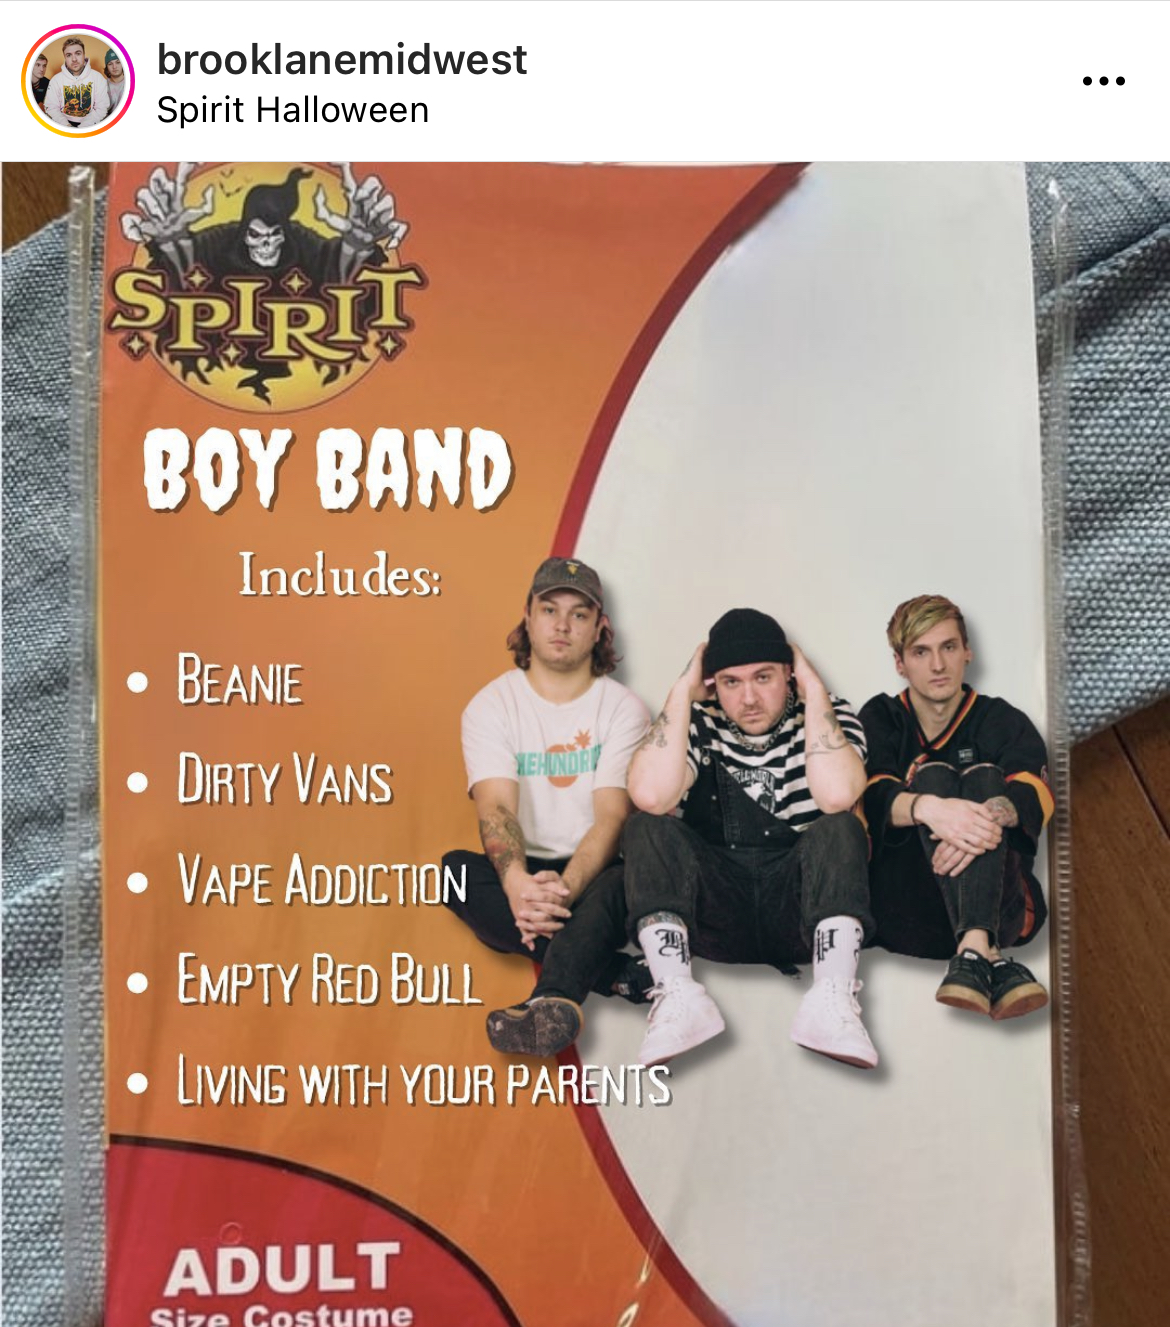 Costume Memes - spirit halloween - brooklanemidwest Spirit Halloween Spirit Boy Band Includes Beanie Dirty Vans Vape Addiction Empty Red Bull Living With Your Parents Adult Size Costume